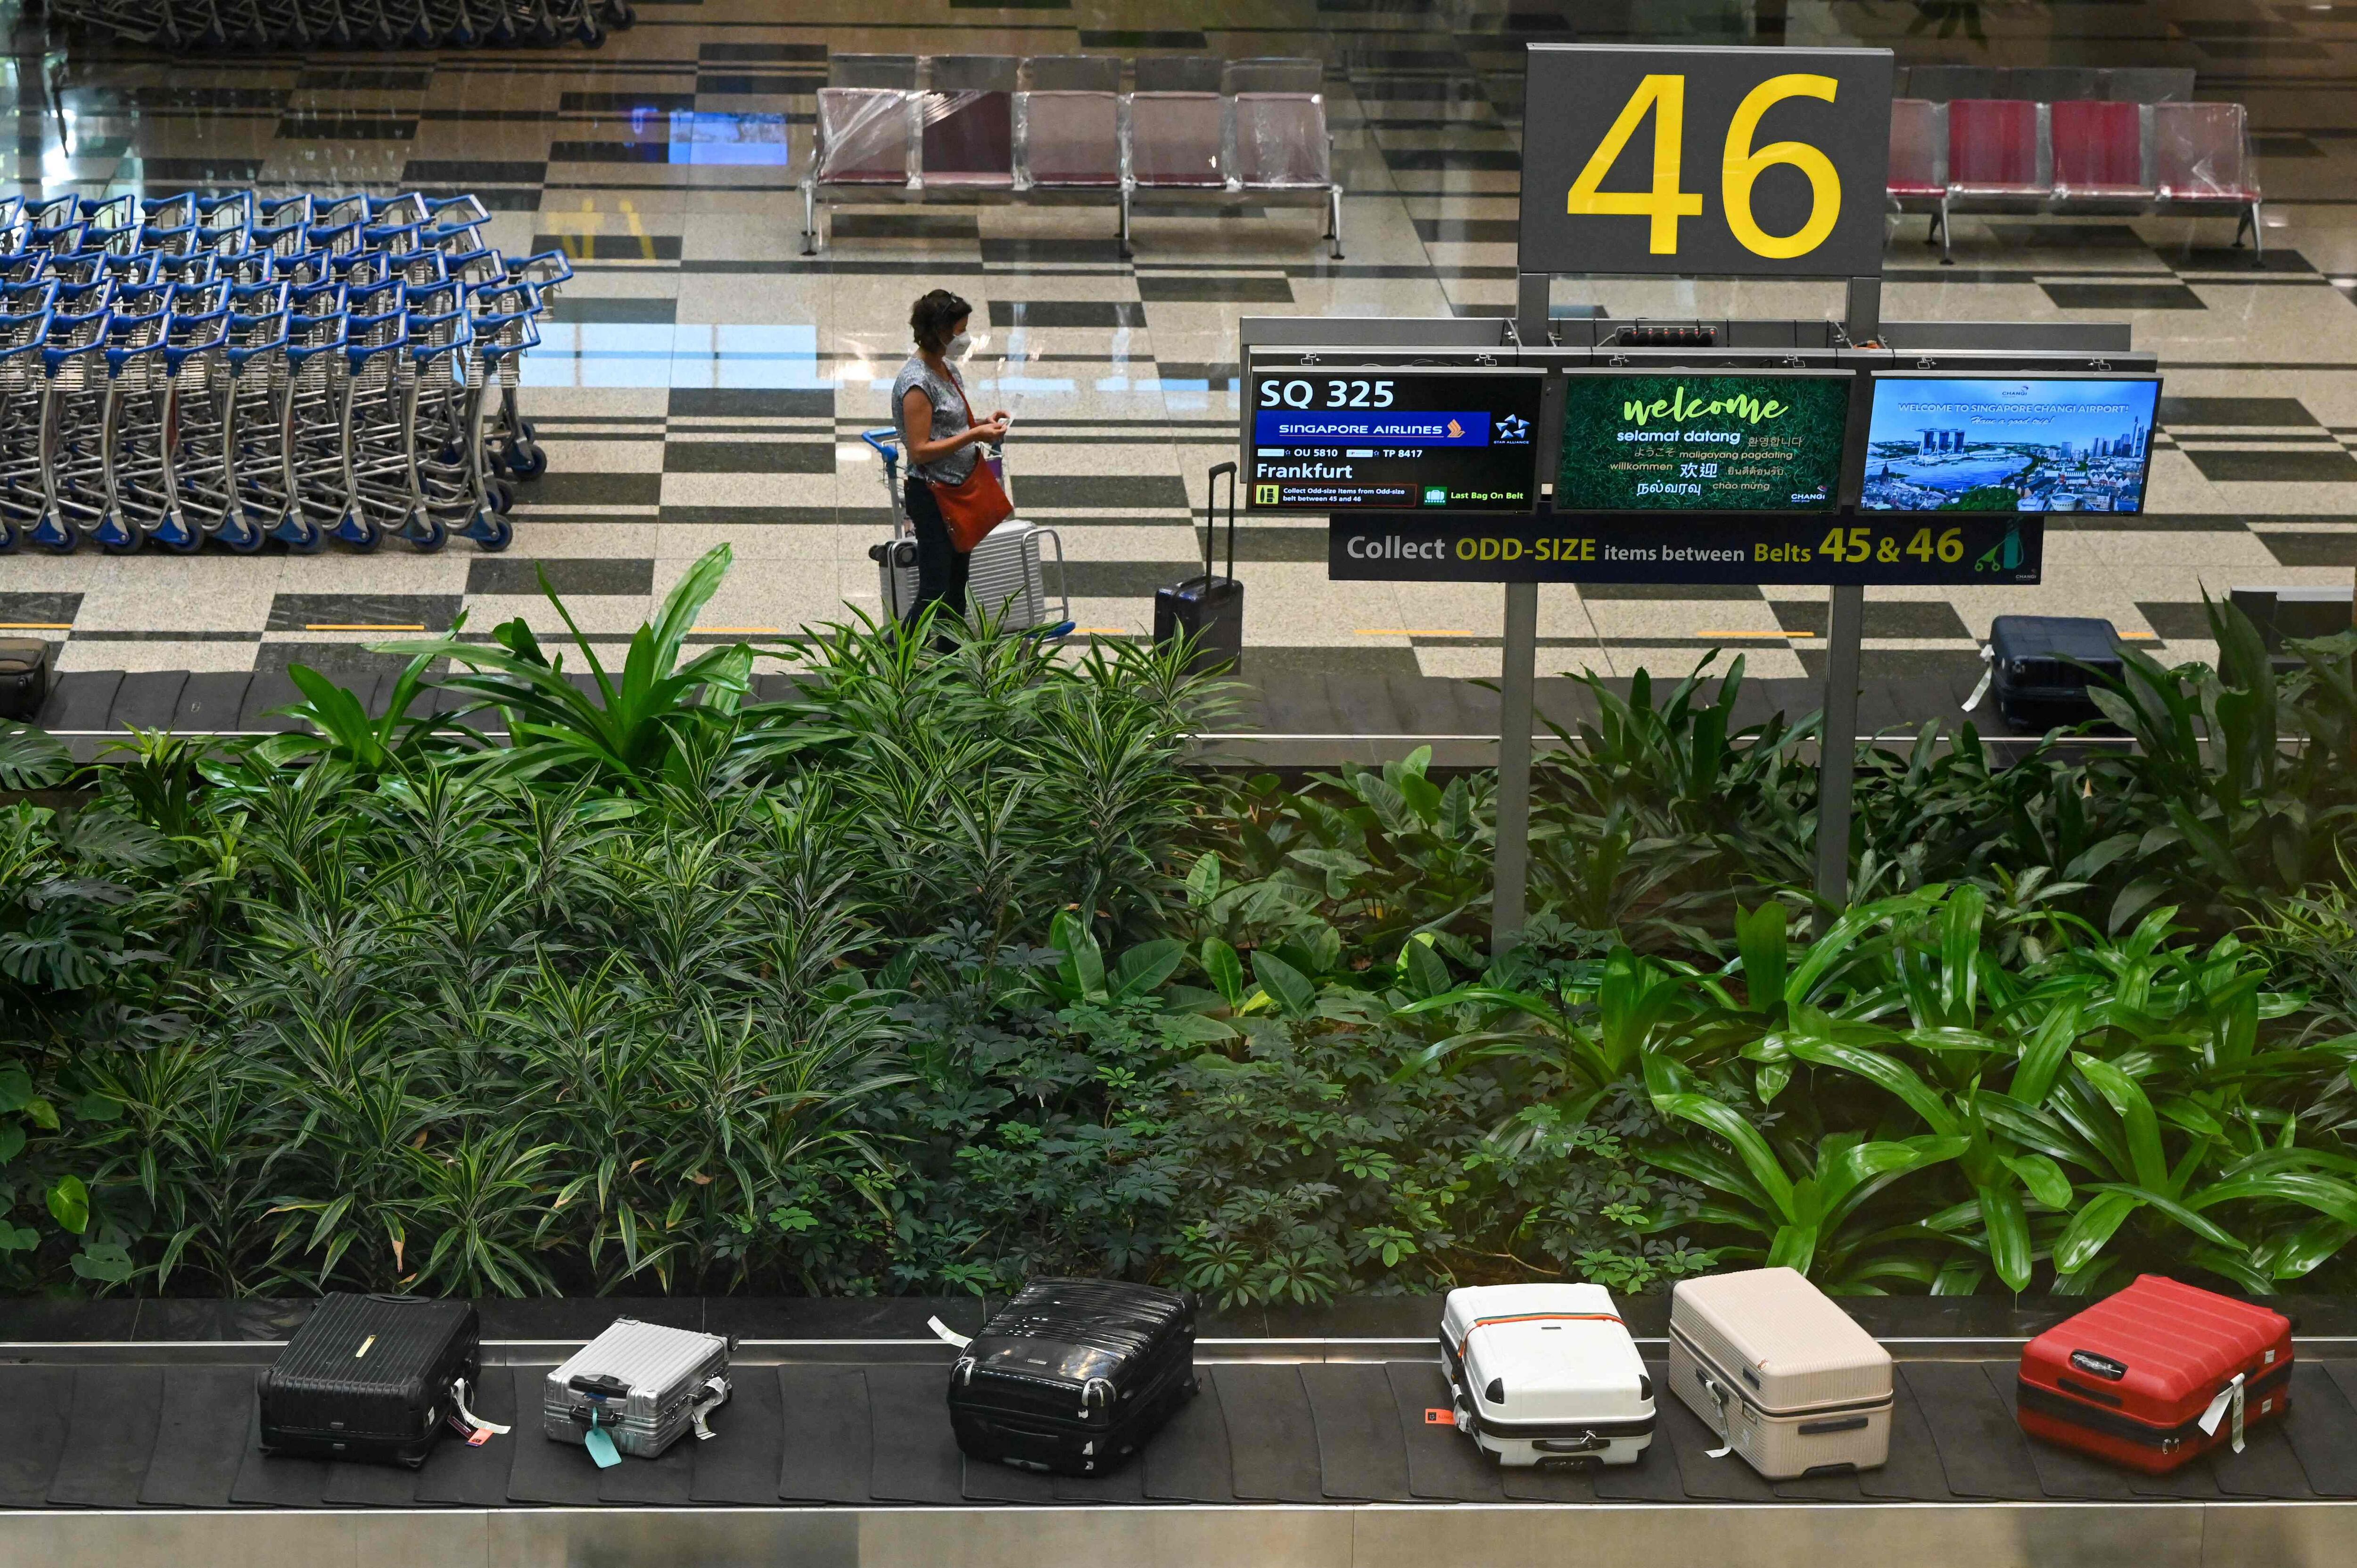 Singapore Changi Airport Terminal 2 and 4 Set for Reopening to Meet Demand  - Bloomberg